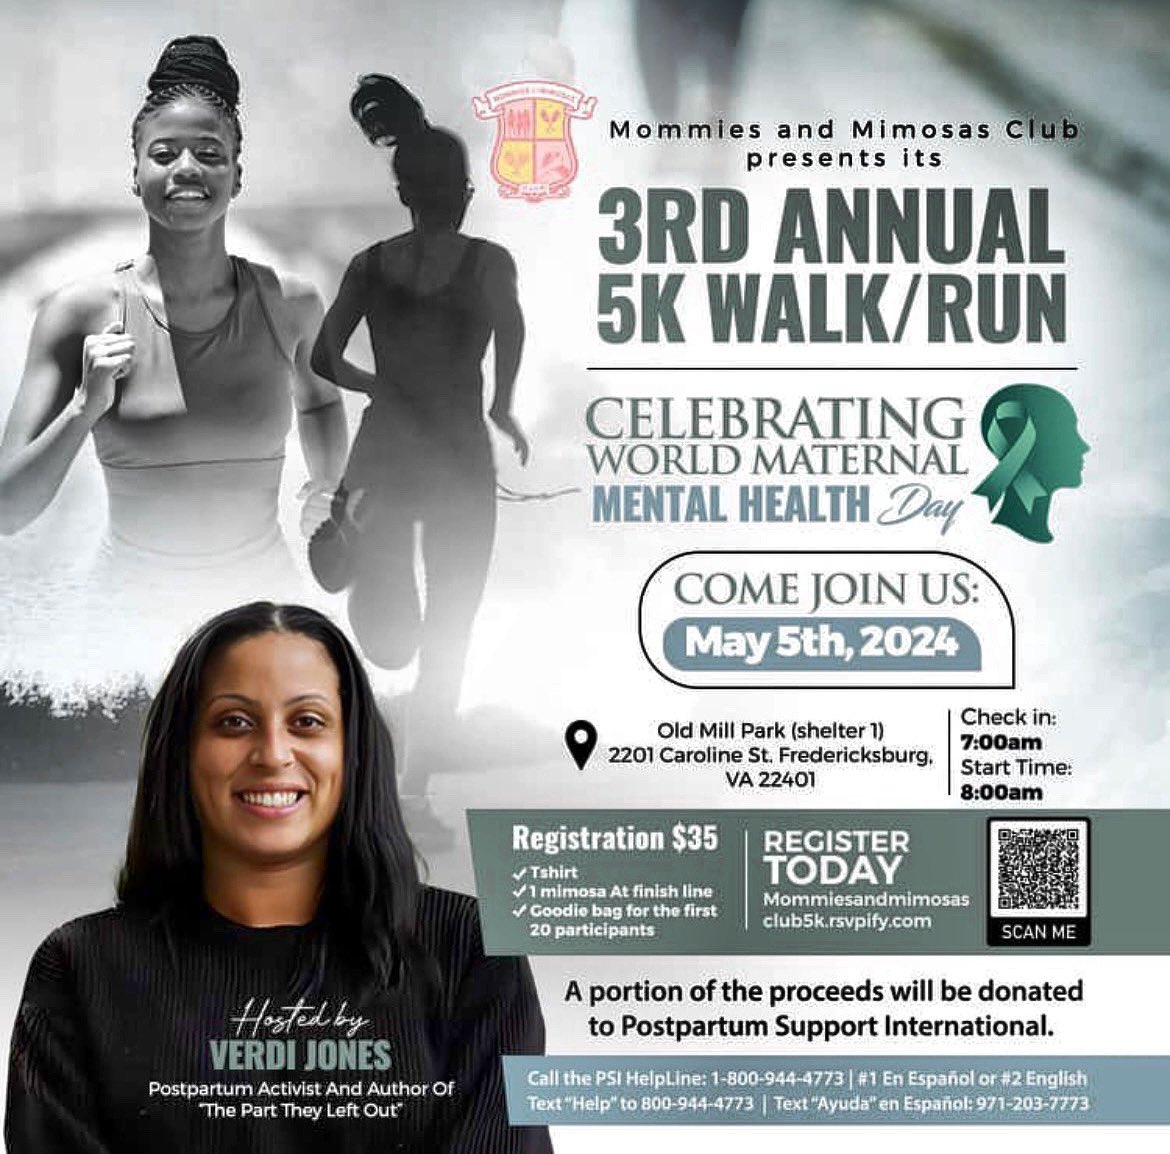 Celebrate #worldmmhday with Mommies and Mimosas Club 3rd Annual 5k Walk/Run with guest host Verdi Jones #maternalmentalhealthmatters #StrongerTogether